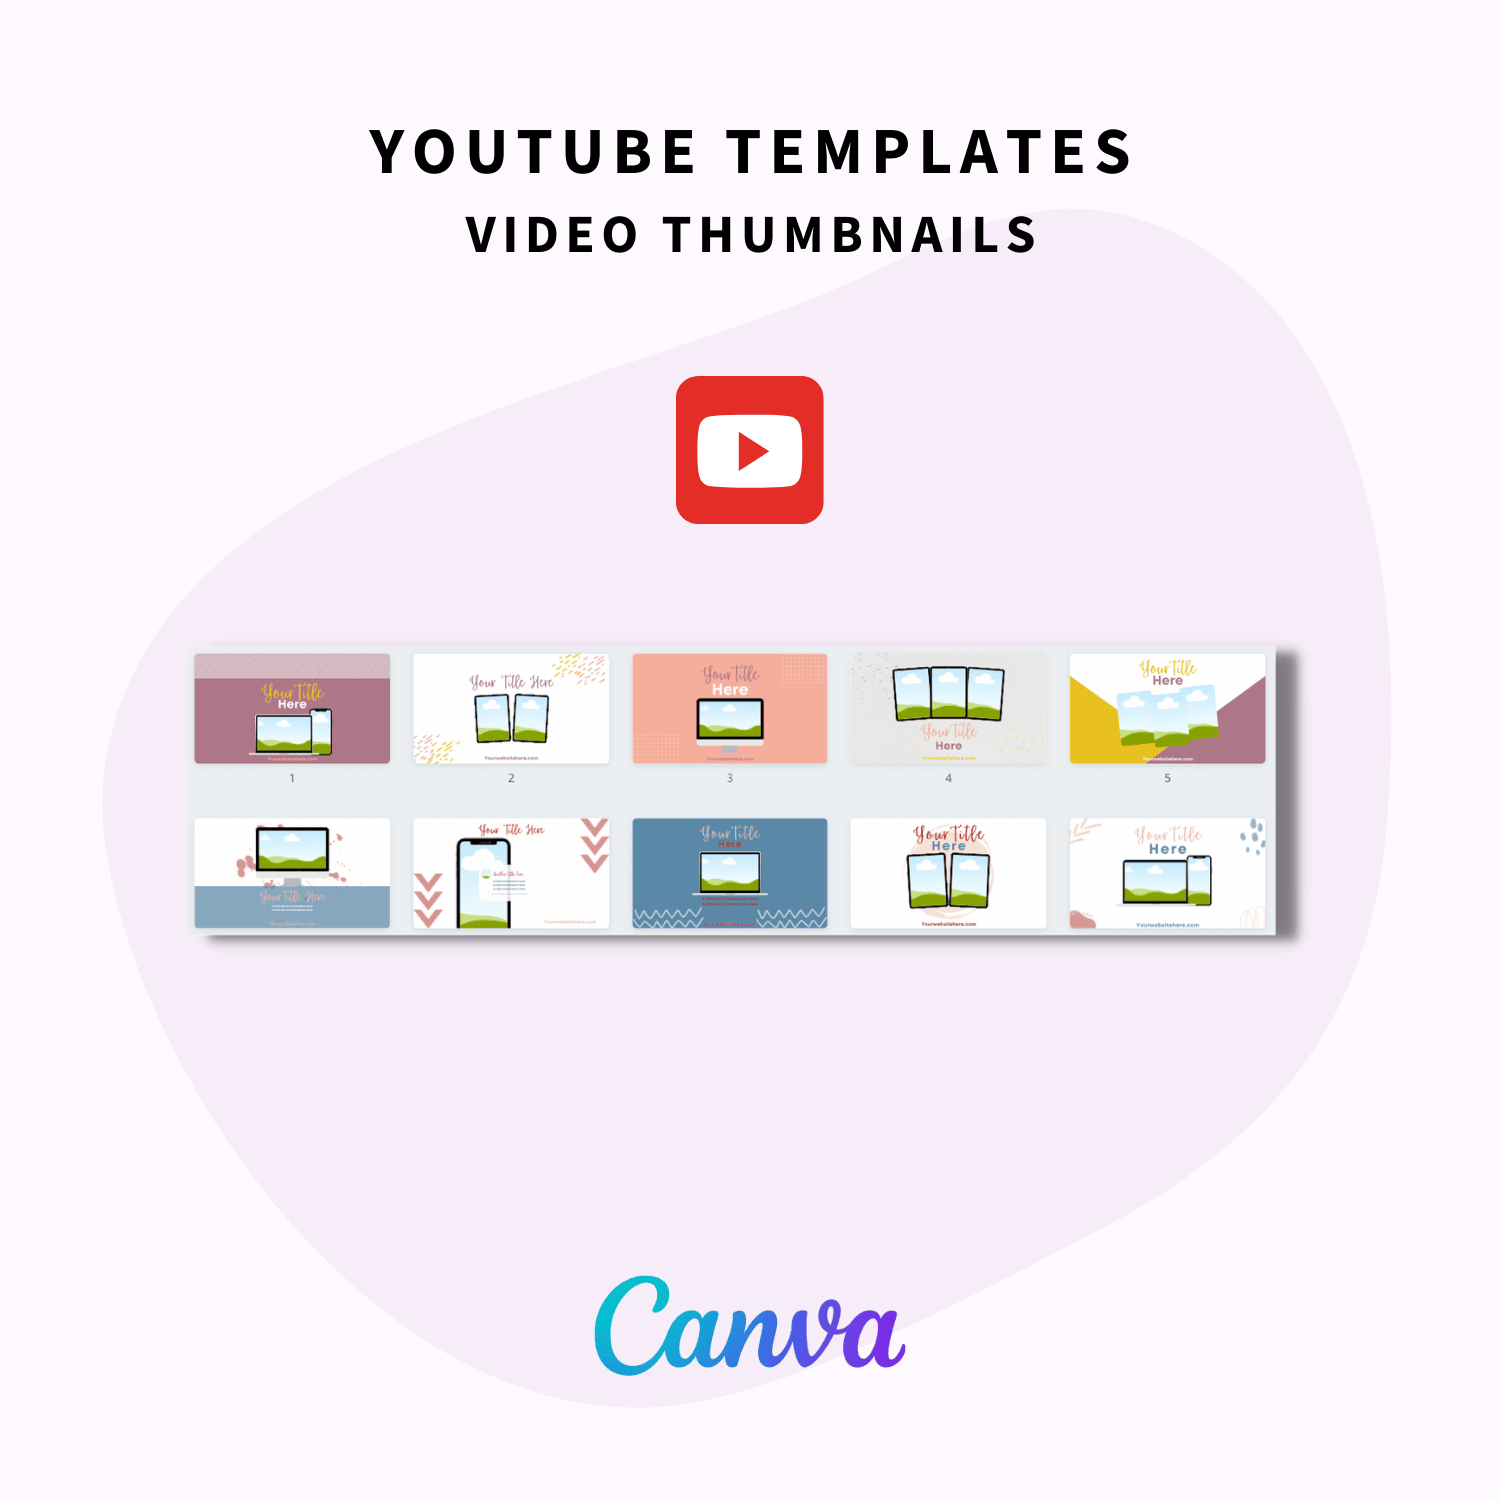 YouTube templates in the Social Media Super Bundle Toolbox